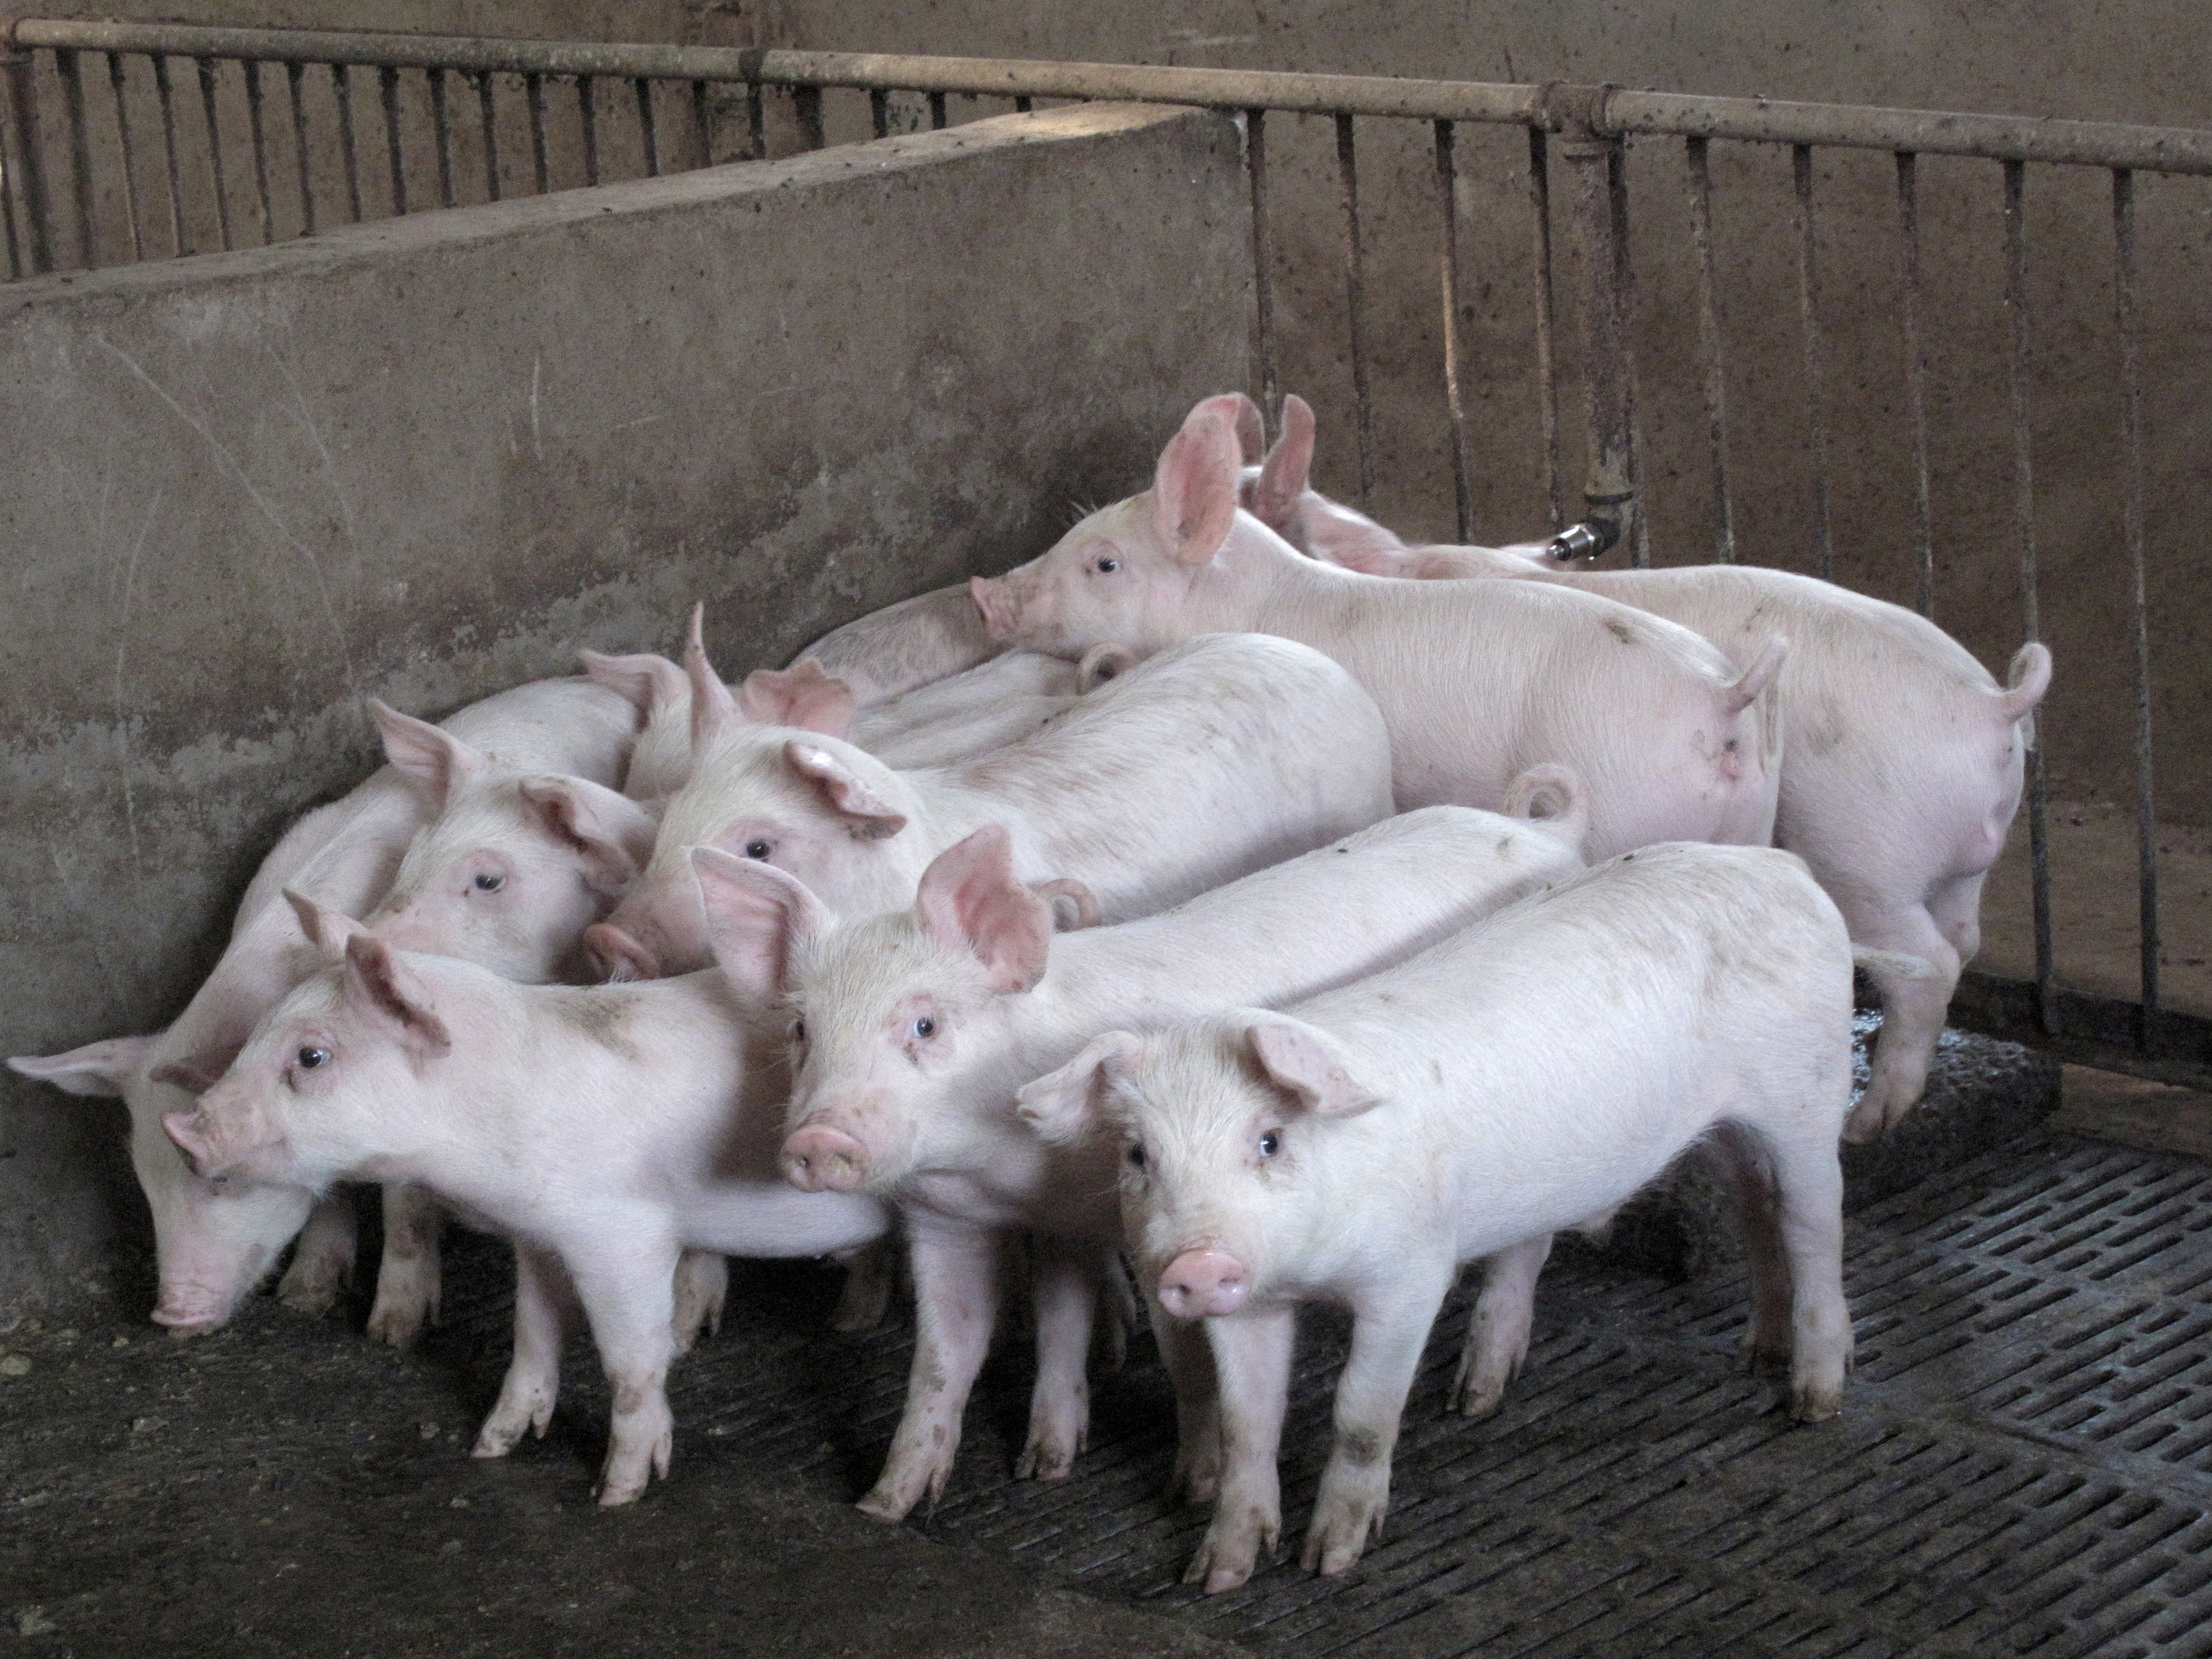 Pigs are seen at a farm in Neihuang county